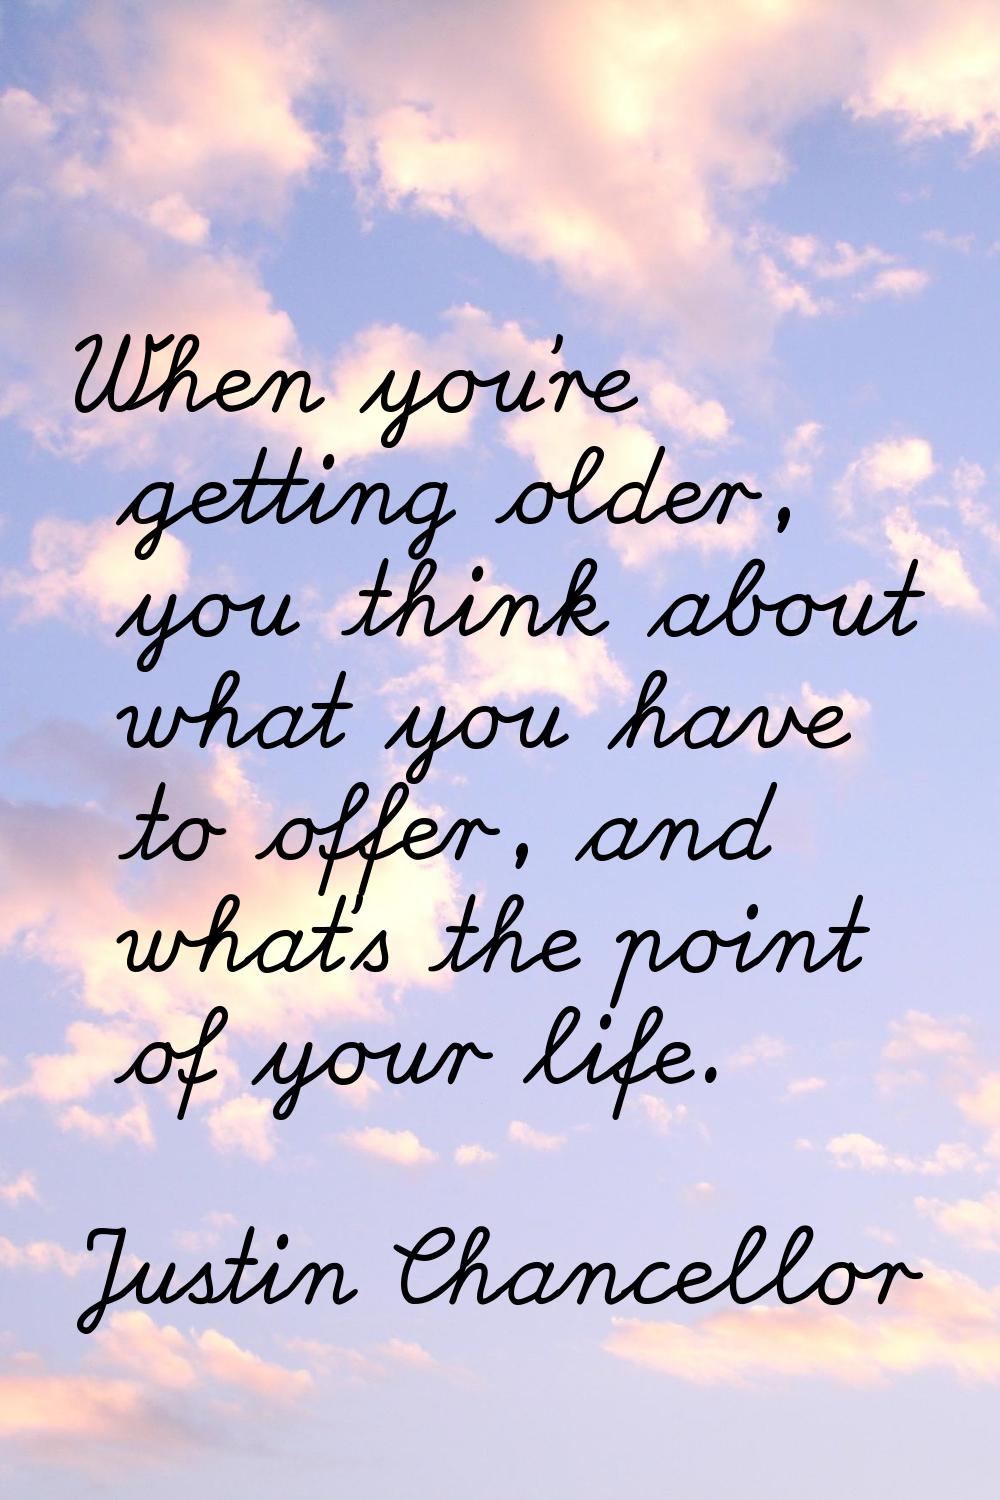 When you're getting older, you think about what you have to offer, and what's the point of your lif